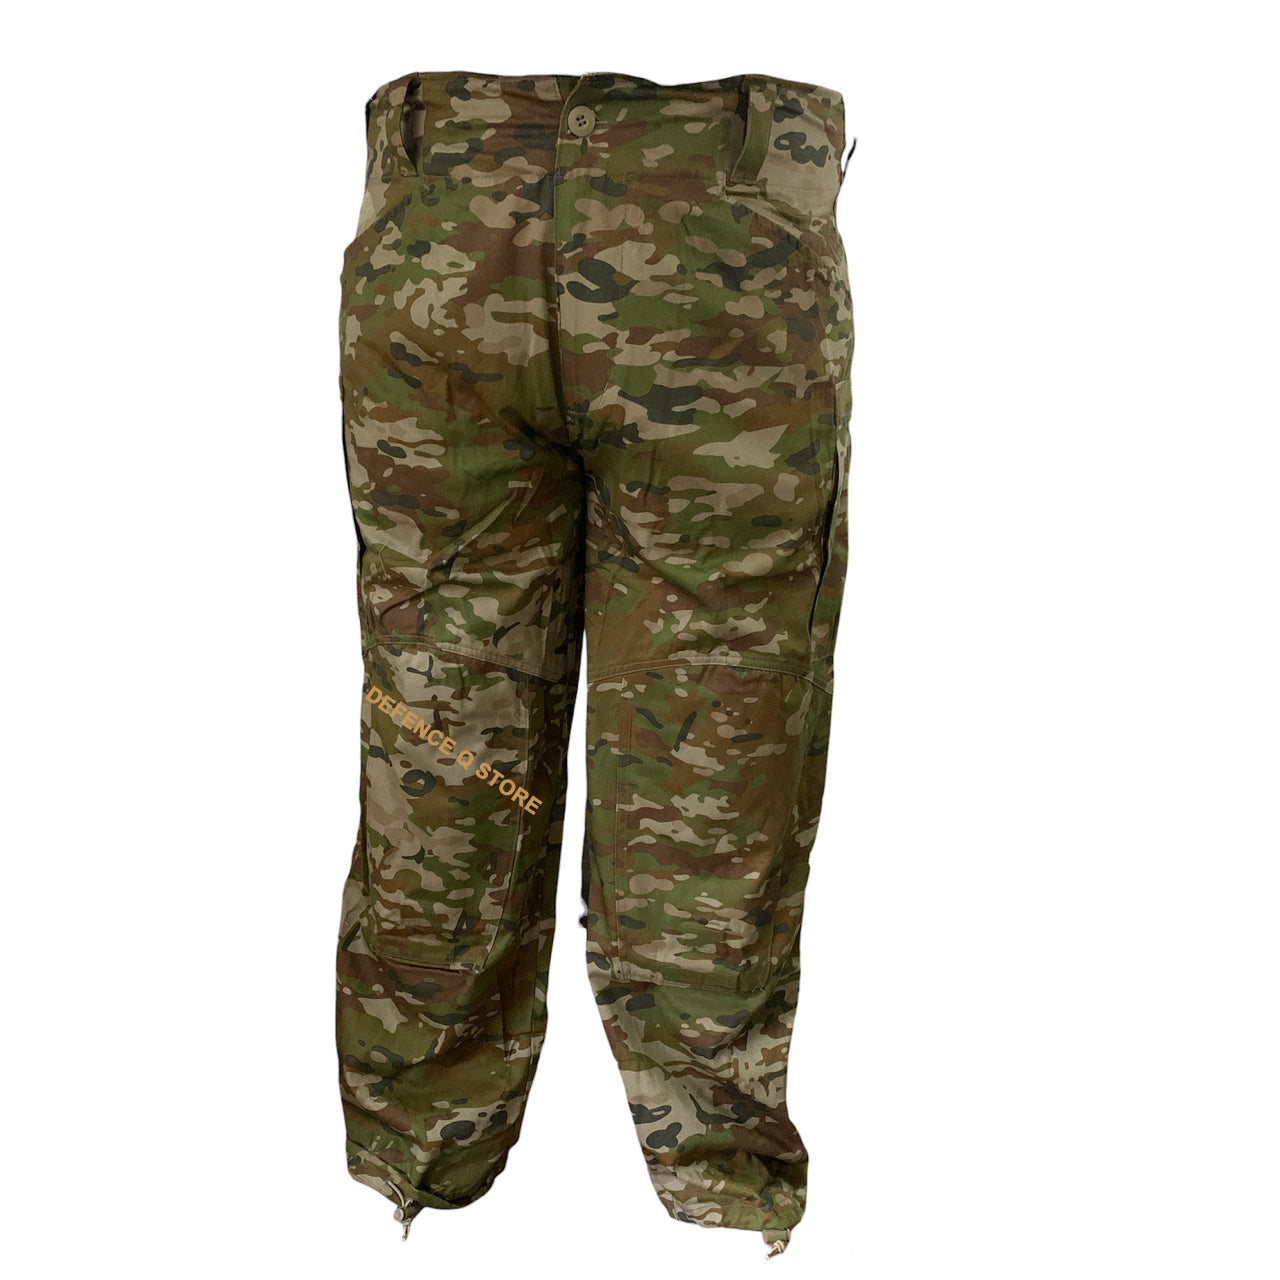 The Army Tactical Trousers AMCU are designed with AMC compatible military pattern, featuring cargo pockets with zips on the legs, an adjustable waist with wide belt loops, and elastic trouser ties with a toggle at the ankles. The groin area is made of elastic material for added comfort and movability, while padding through the waistband maintains a similar design to standard military trousers. Made with 100% cotton, the trousers come in a stylish AMC color. www.defenceqstore.com.au